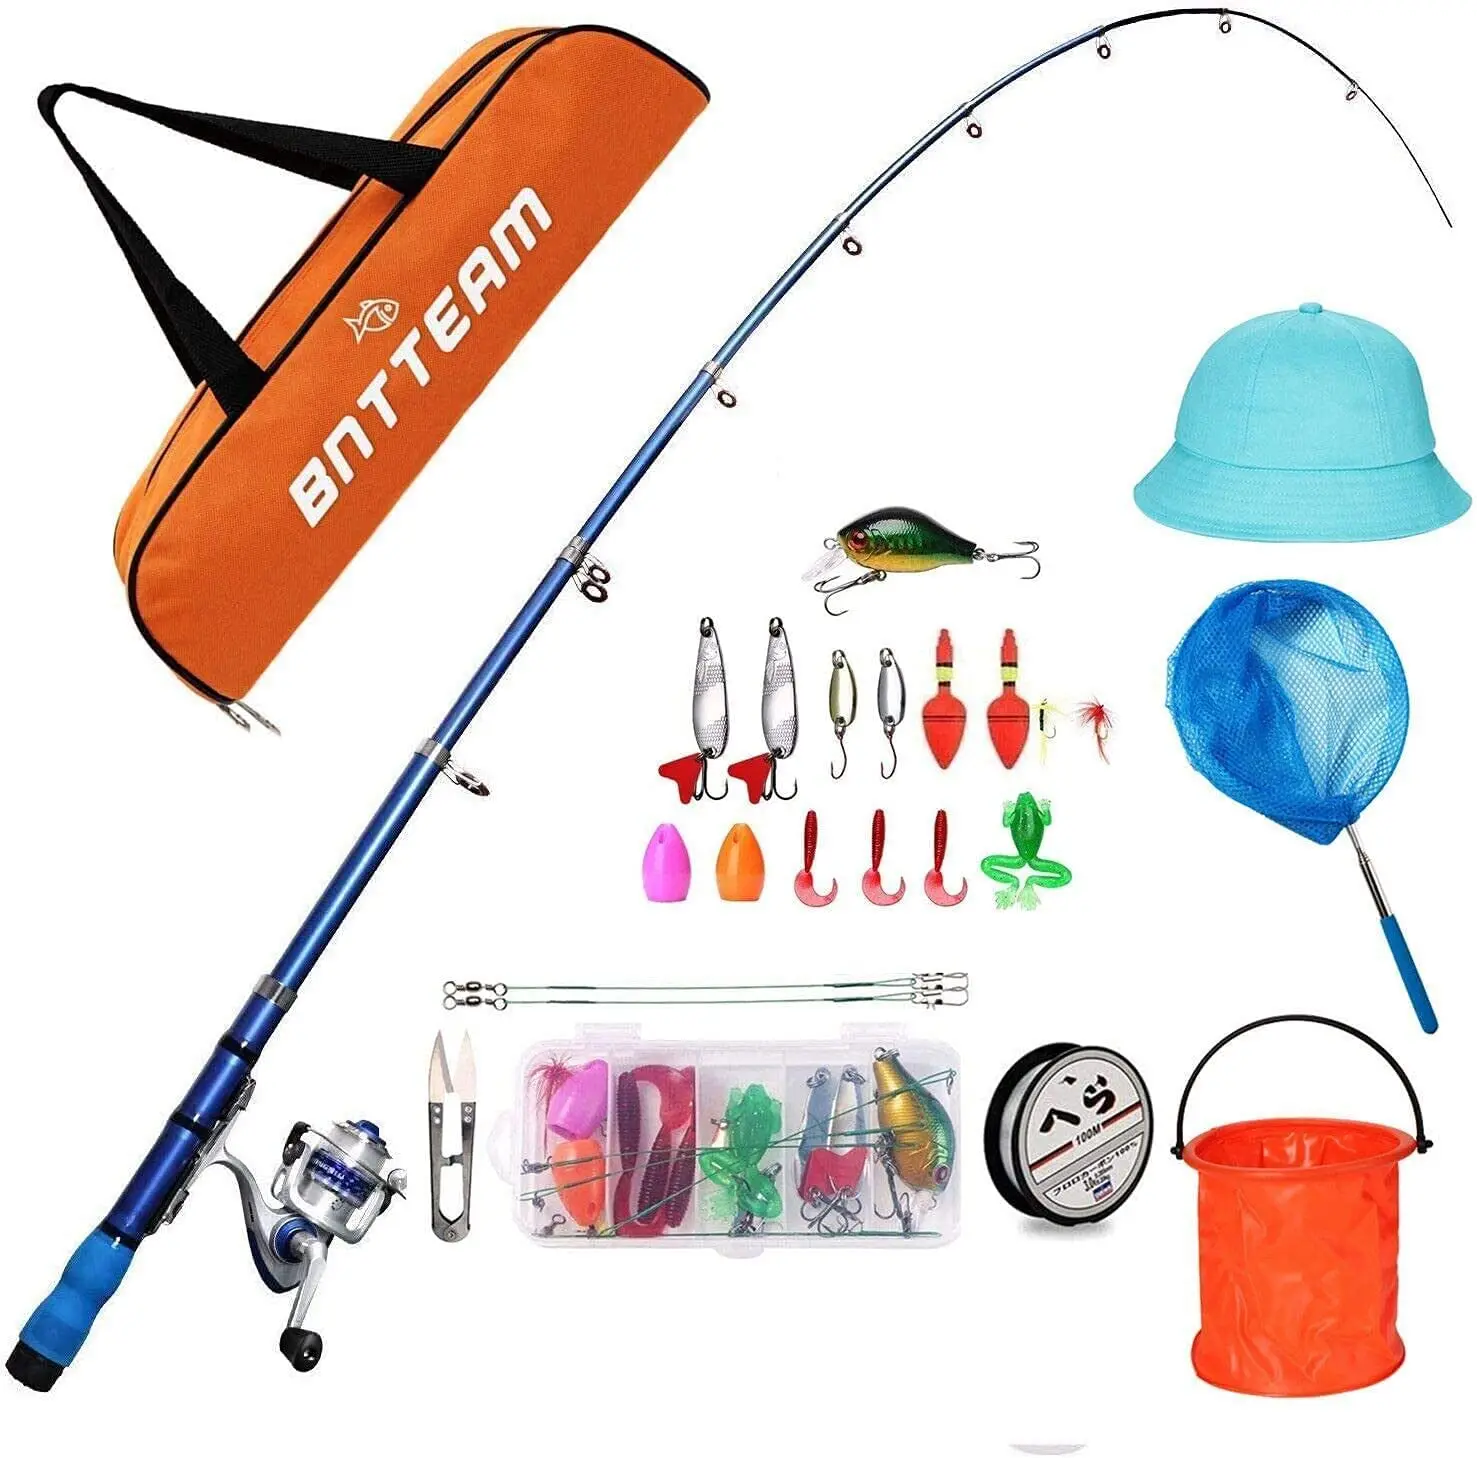 

BNTTEAM Mini Spinning Reel Rod Combos With Telescopic Fishing Rod Reel Lures Hat Folding Bucket Net Line Set for Kids/Beginners